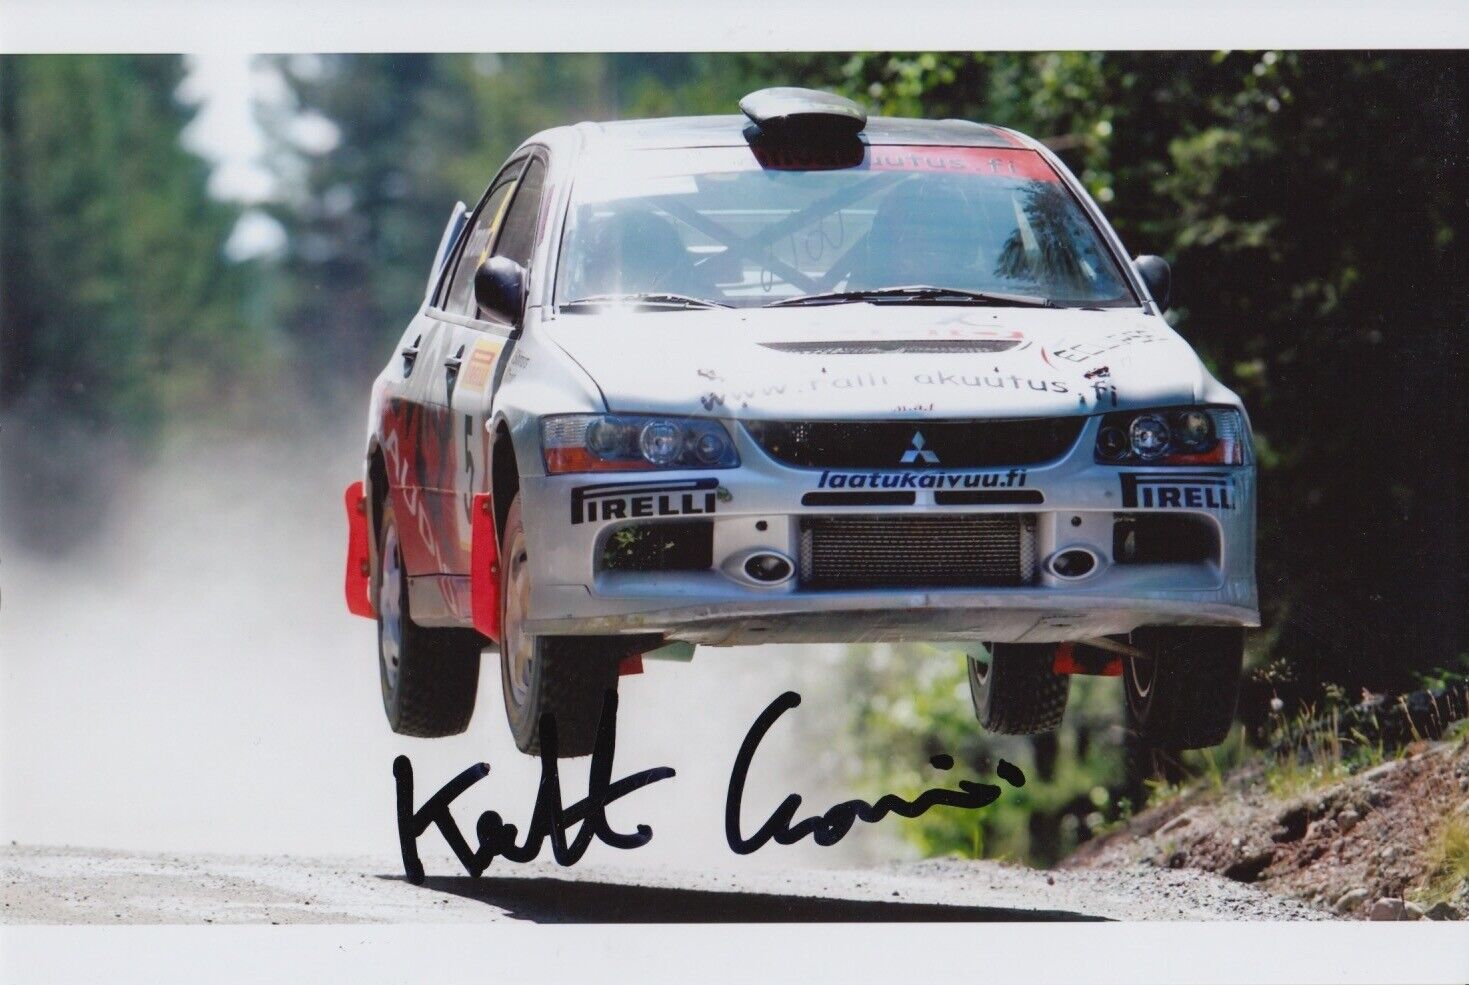 Keith Cronin Hand Signed 7x5 Photo Poster painting - Rally Autograph 3.